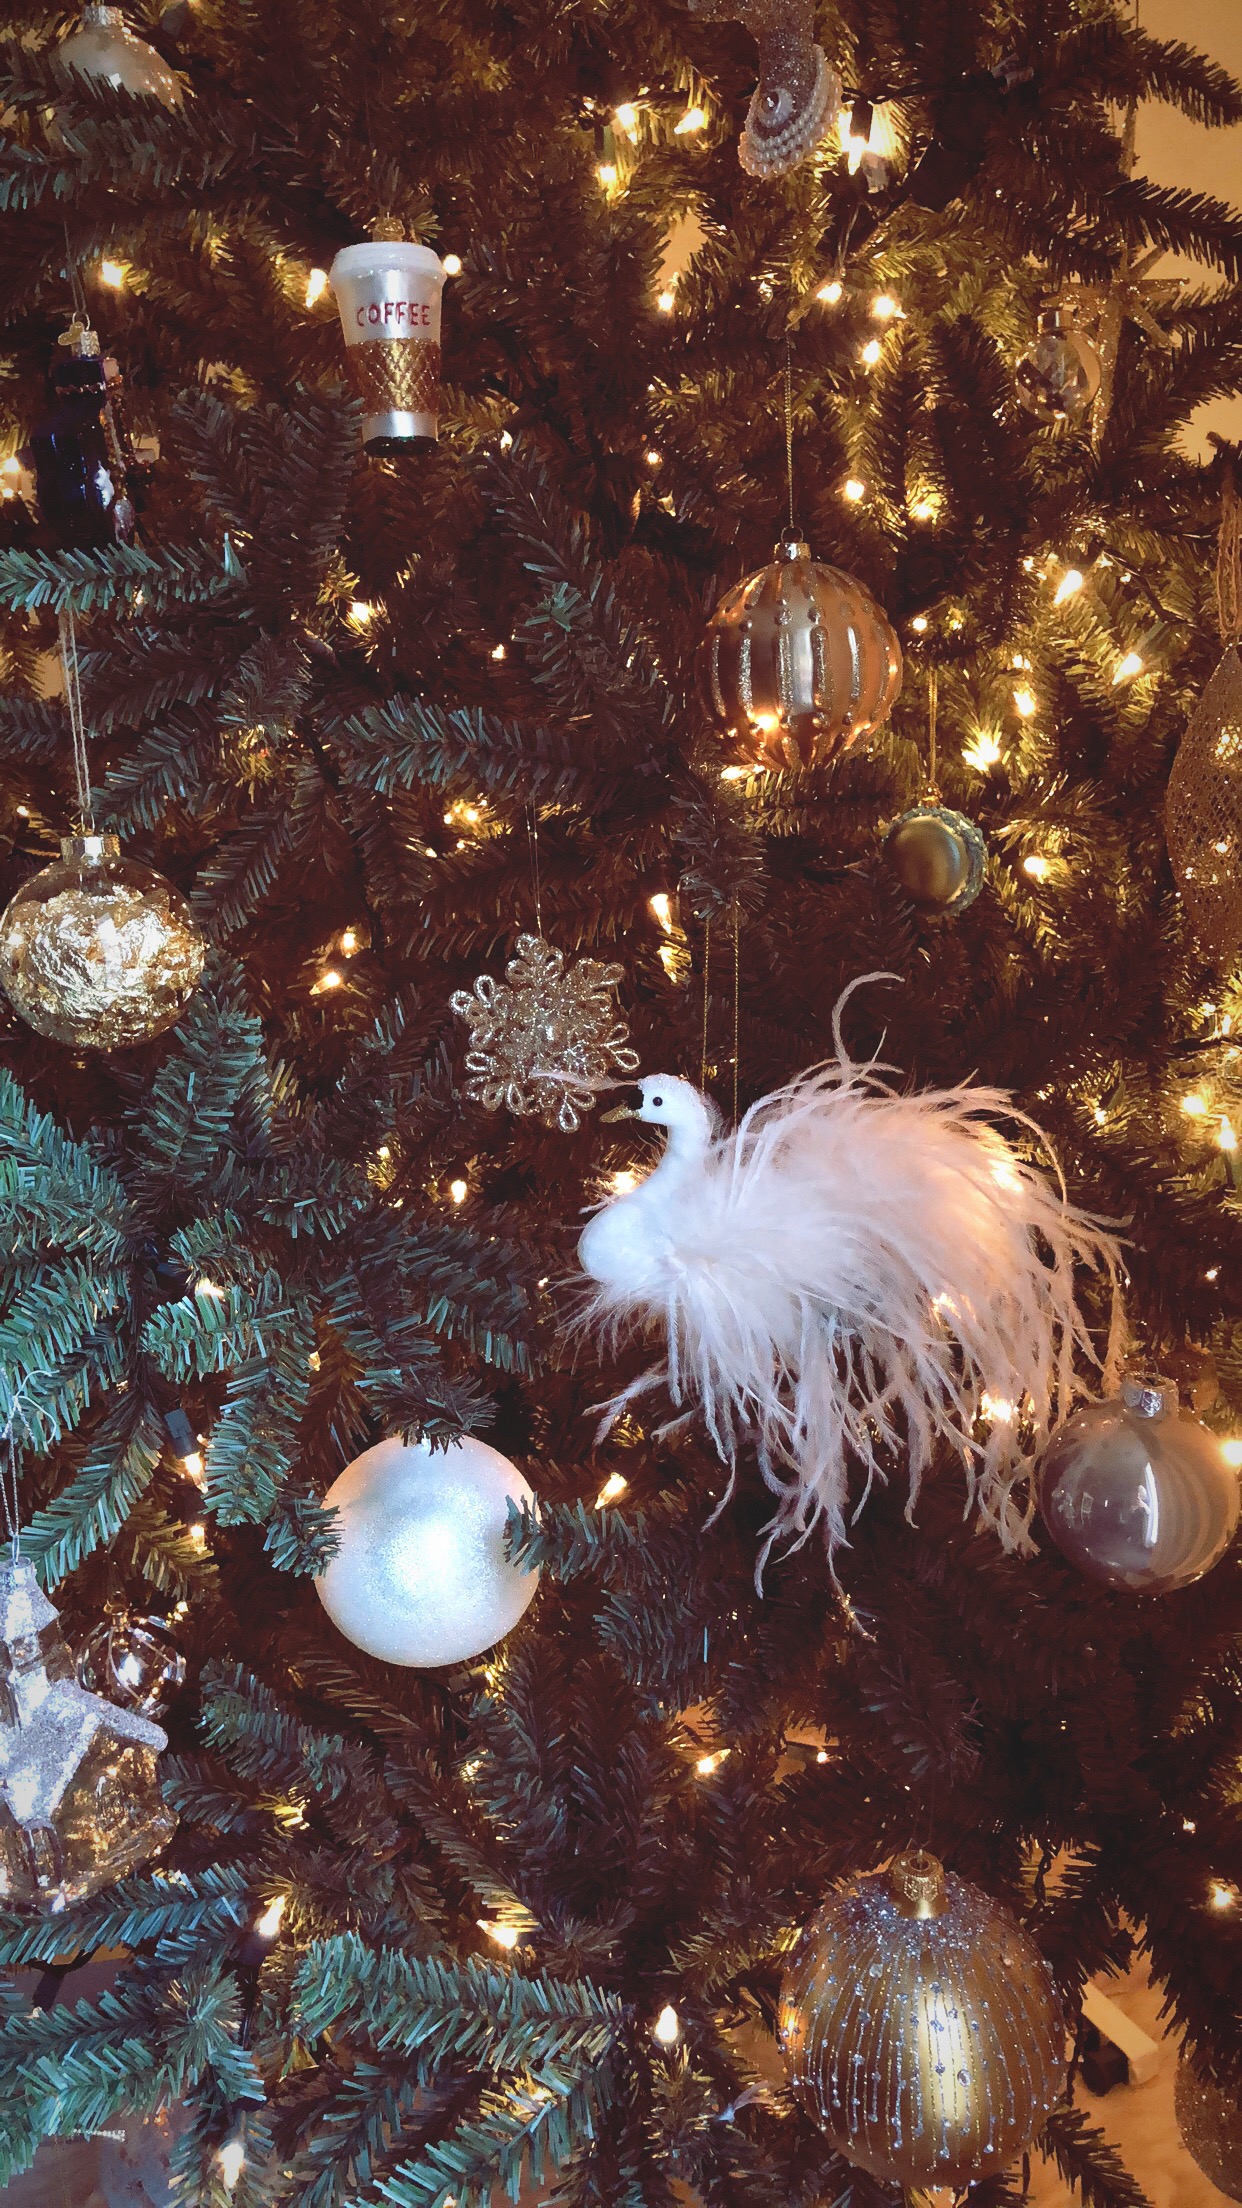 My Favorite Christmas Ornaments | The Style Scribe